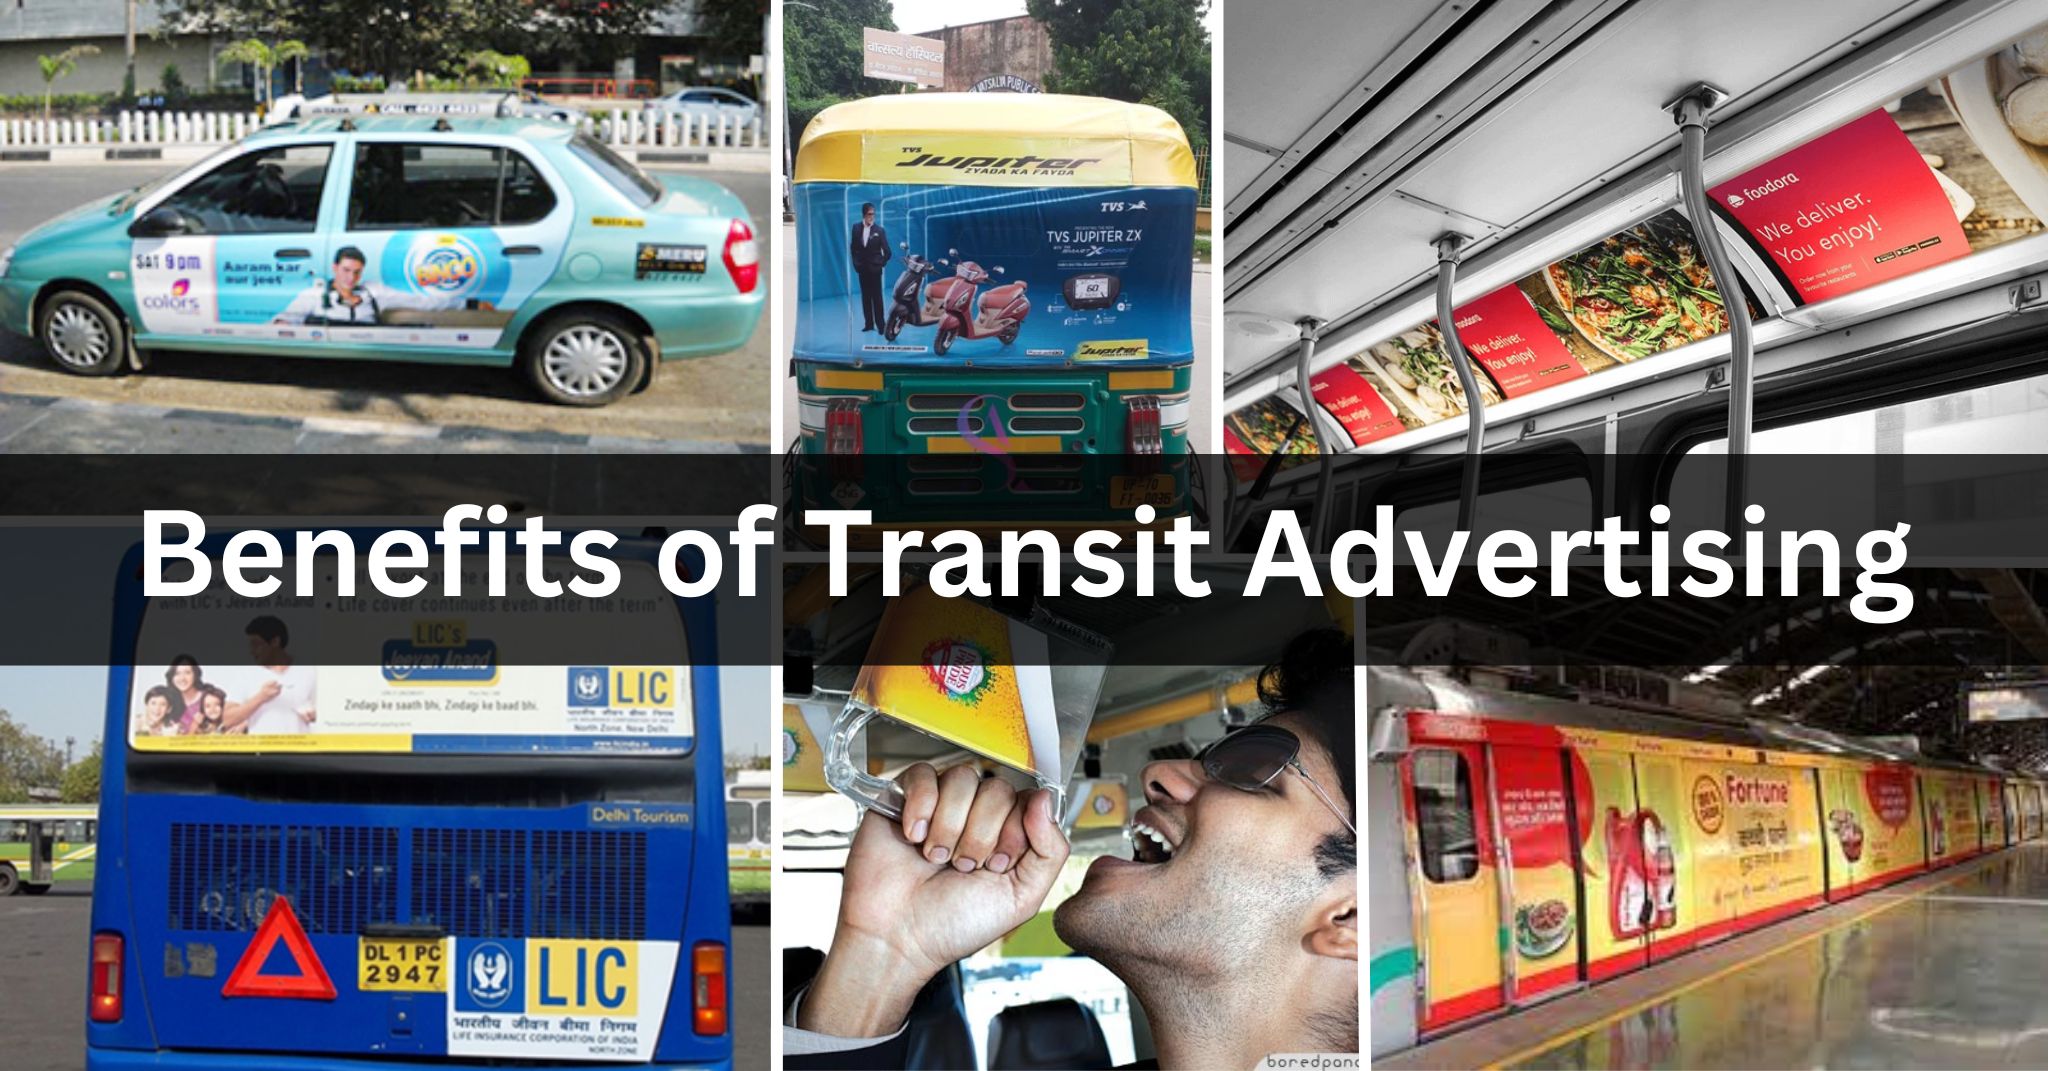 The Benefits of Transit Advertising for Local Businesses